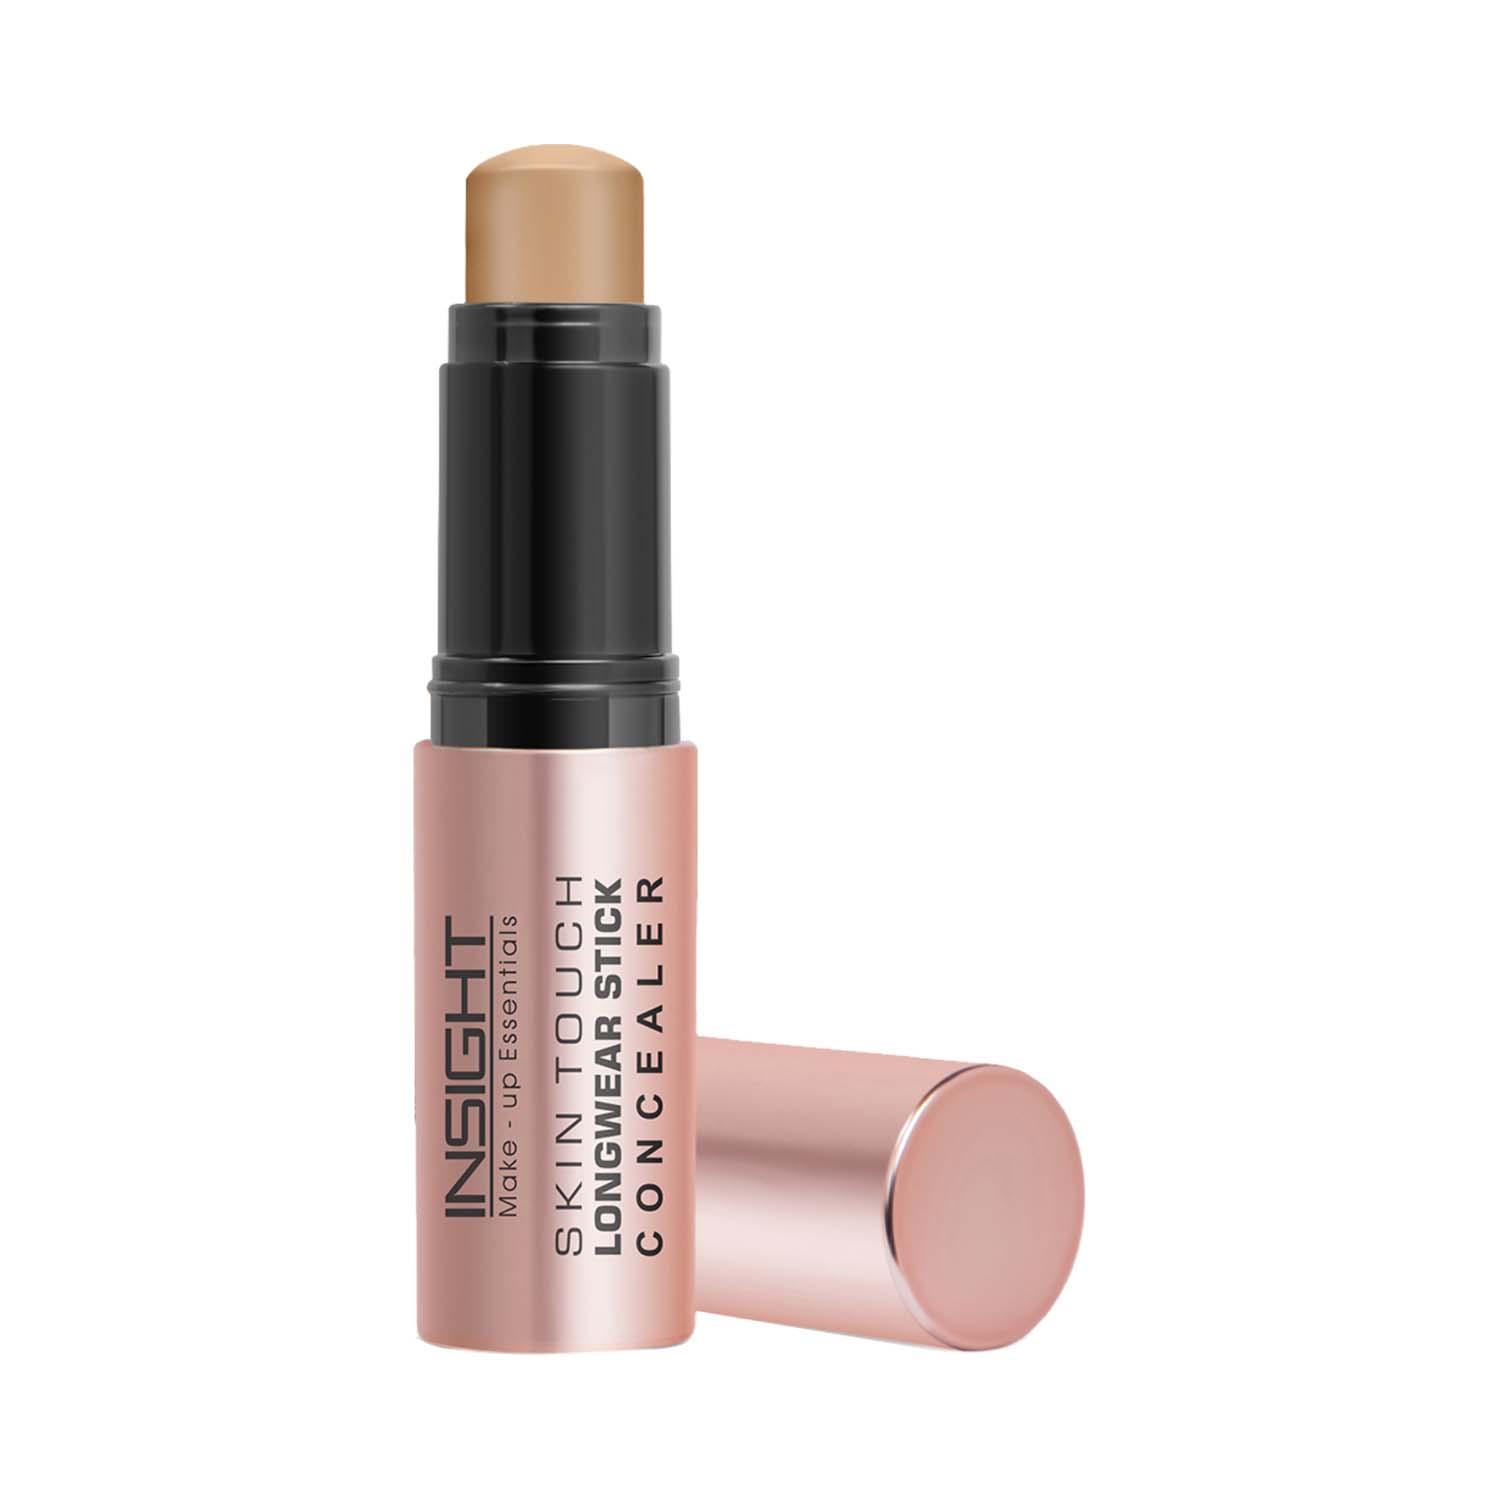 Insight Cosmetics | Insight Cosmetics Skin Touch Longwear Concealer - MN30 (5 g)